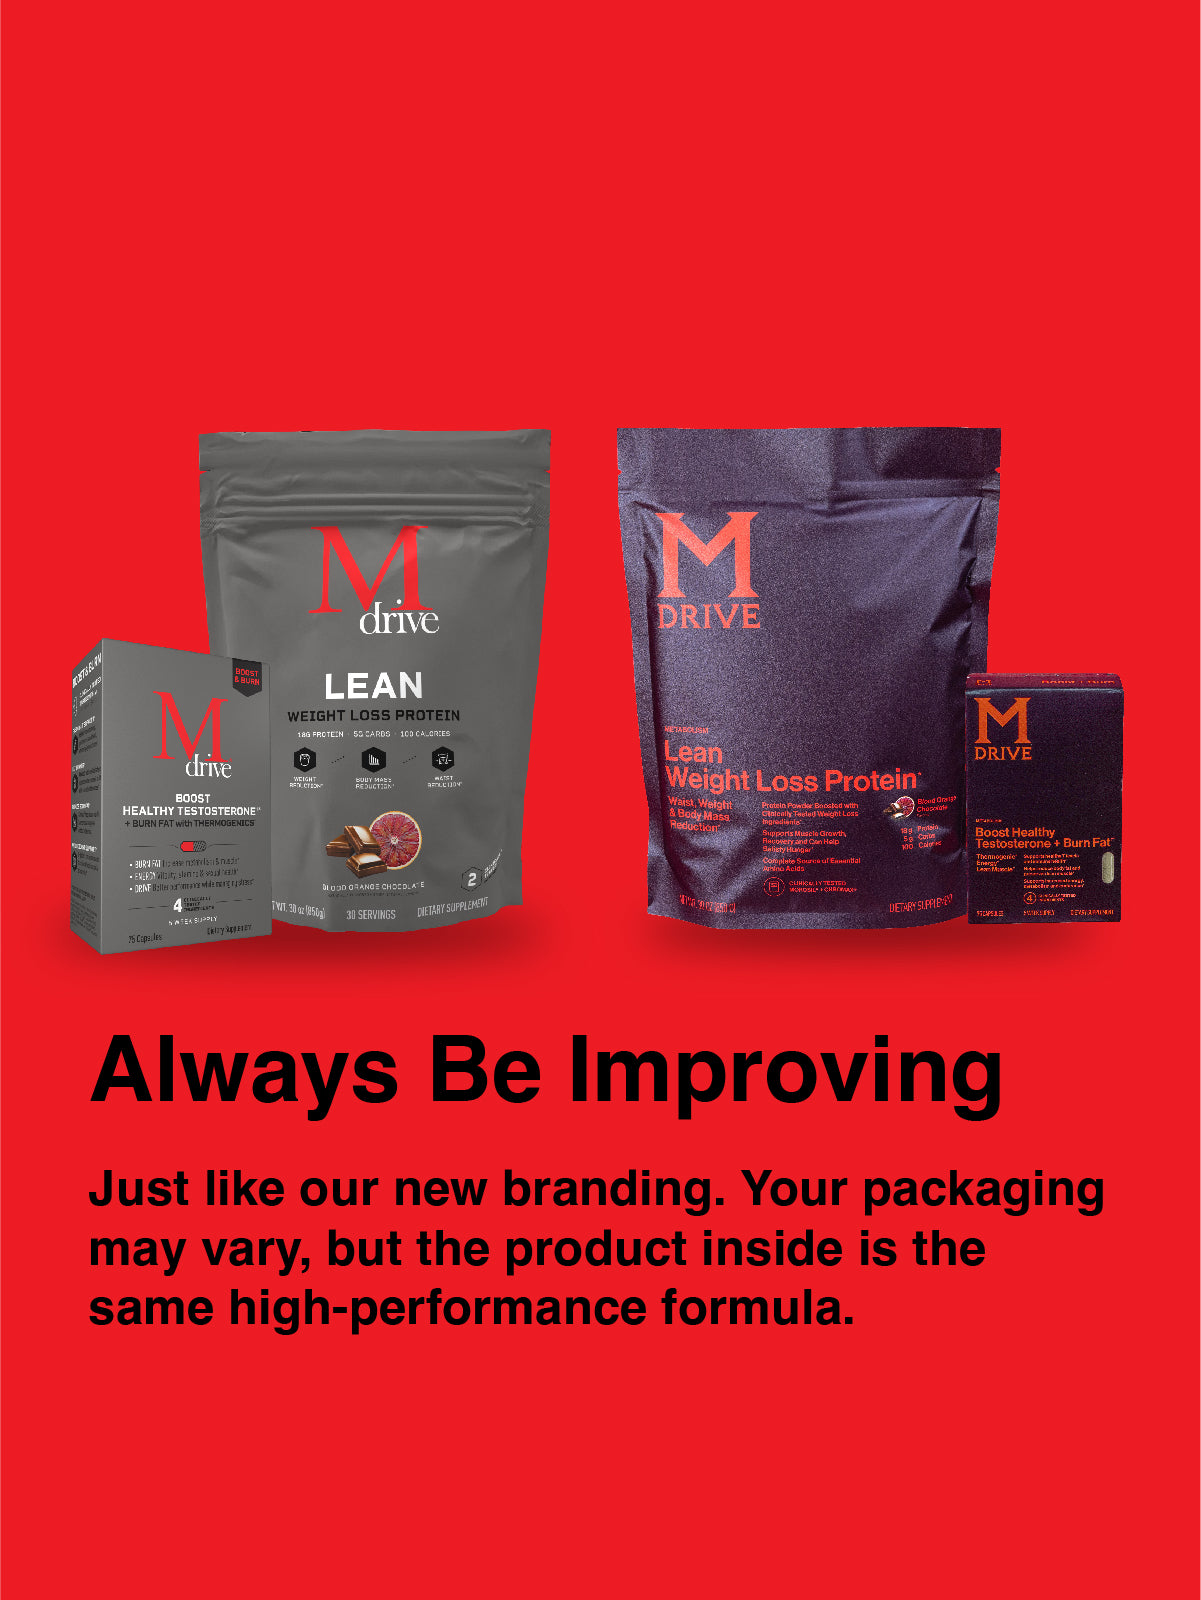 Always be improving just like our new branding. Your packaging may vary, but the product inside is the same high-performance formula